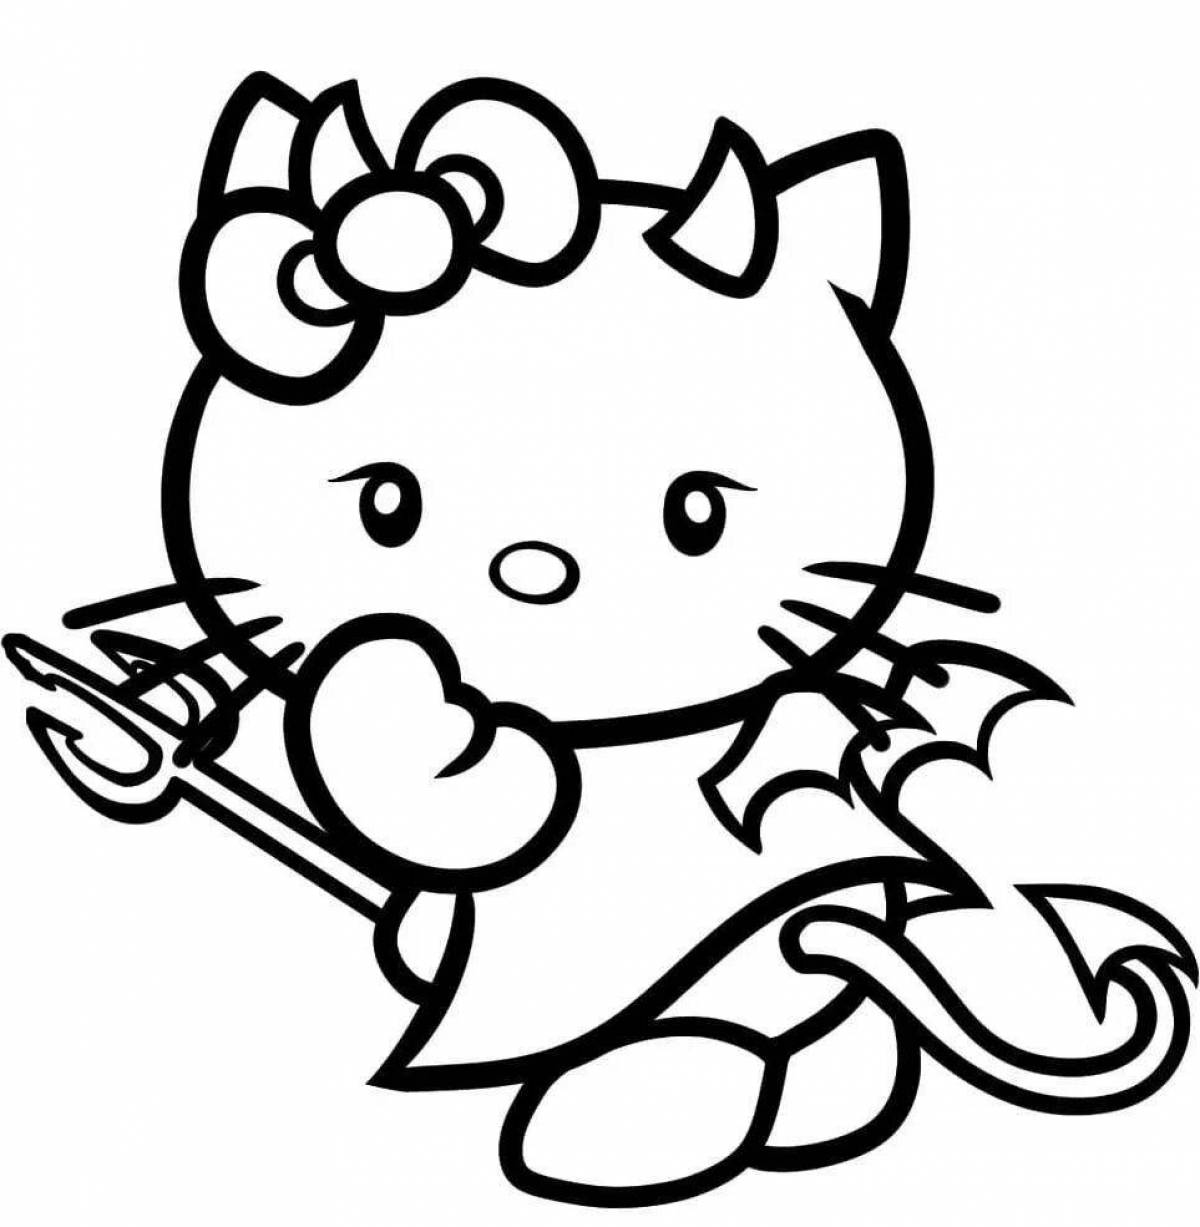 Disgusting hello kitty coloring page